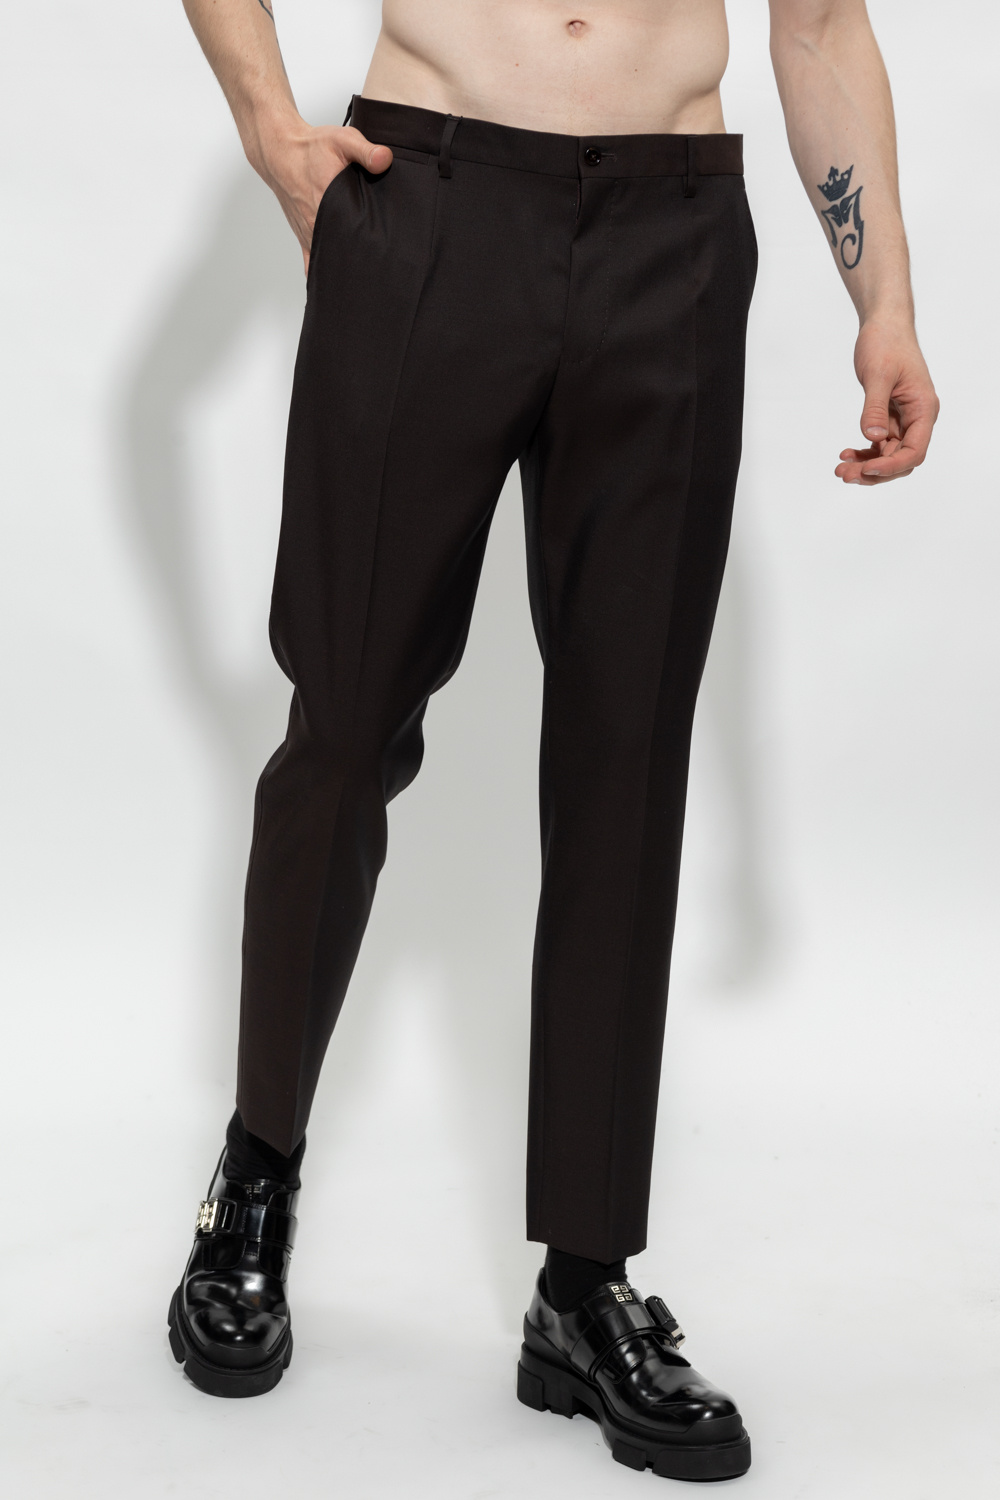 Prada lace-up mid-length dress Black Pleat-front trousers